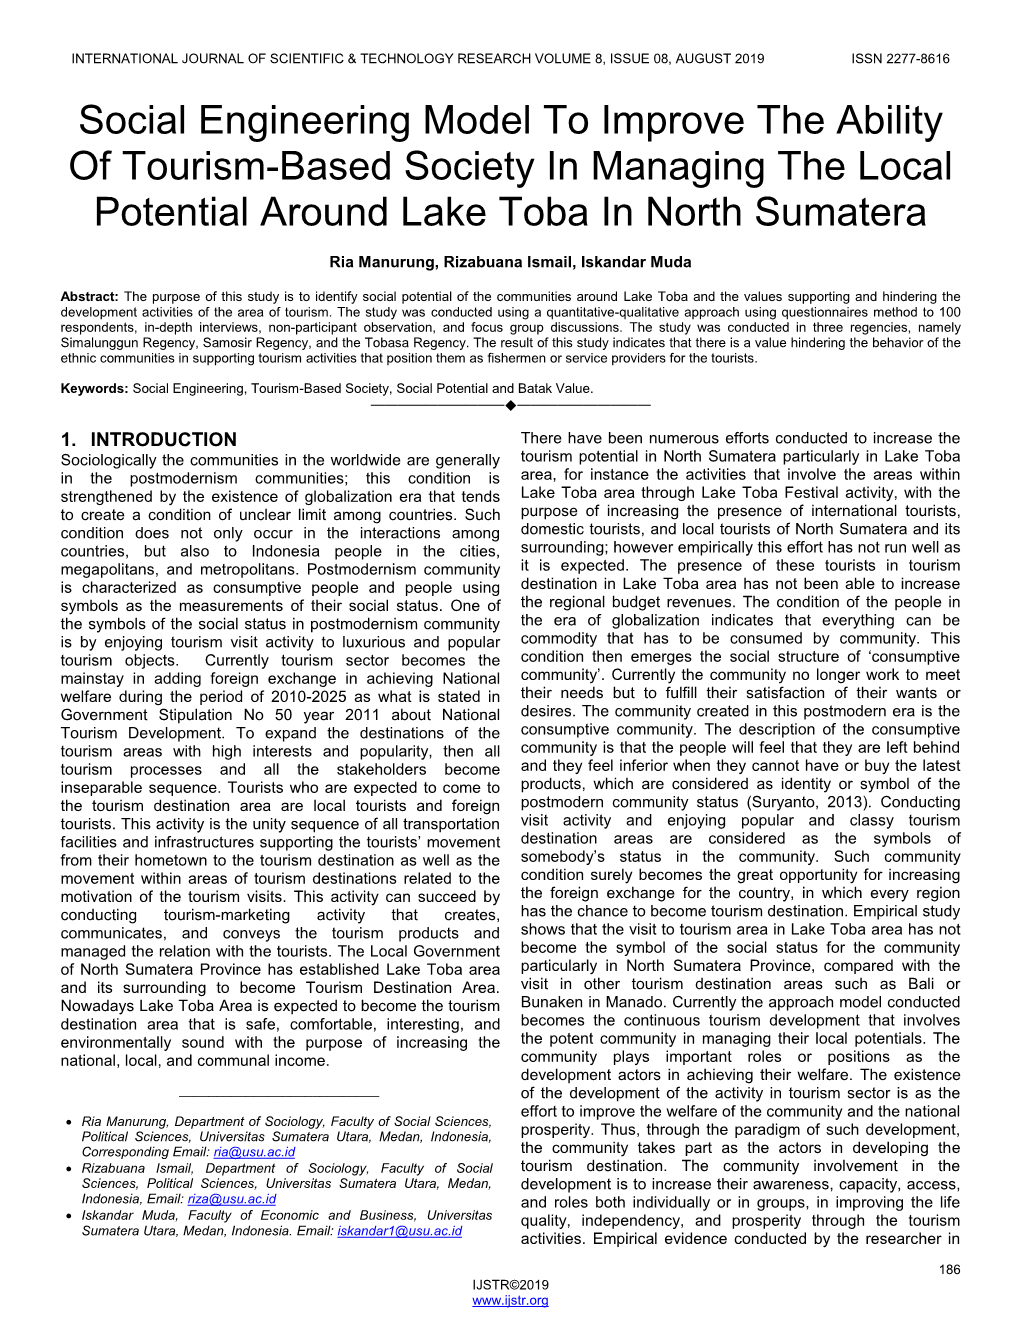 Social Engineering Model to Improve the Ability of Tourism-Based Society in Managing the Local Potential Around Lake Toba in North Sumatera